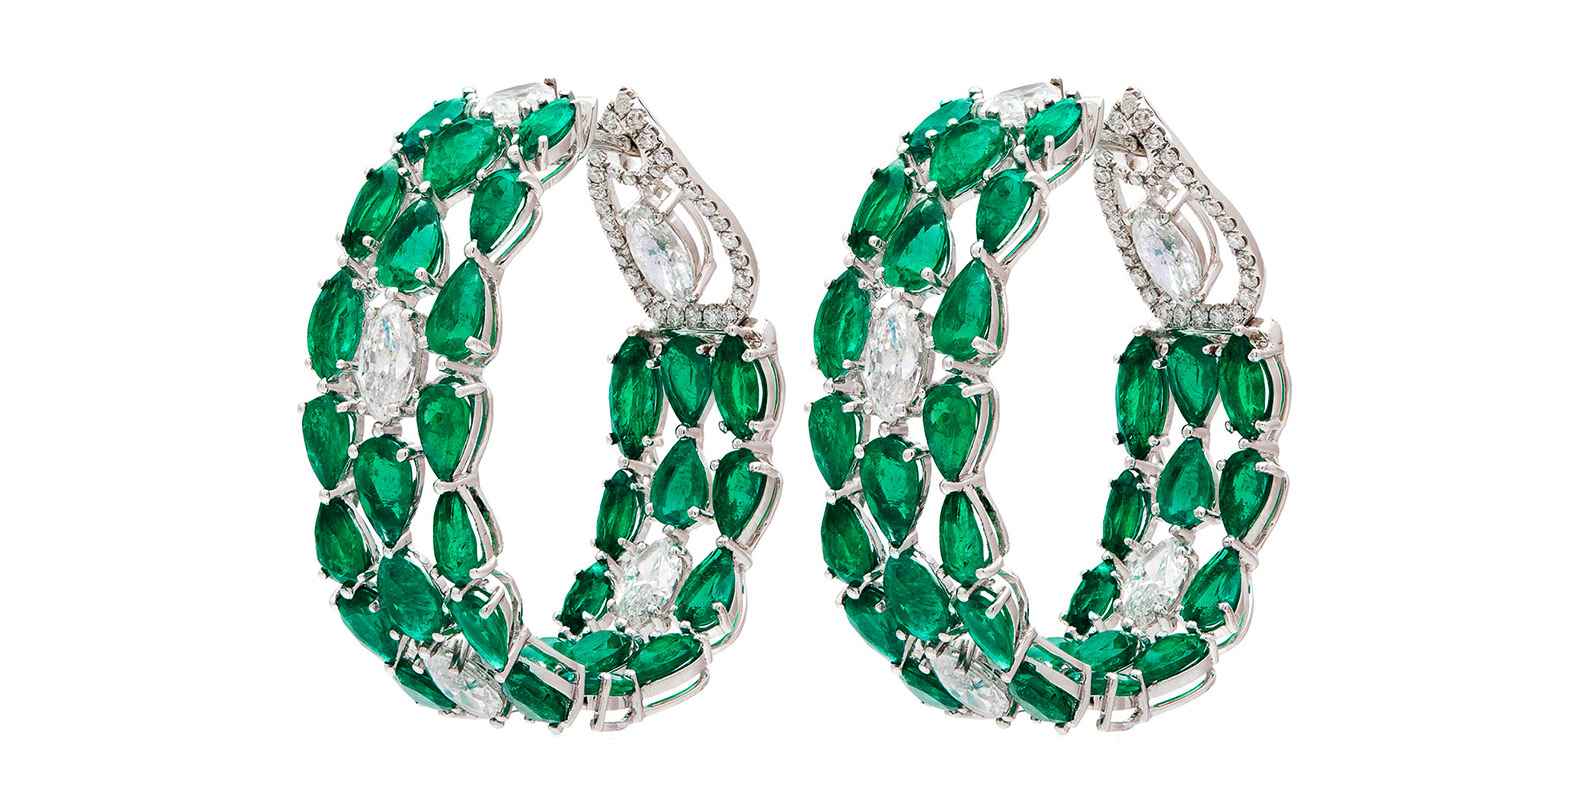 Ruchi New York Jewels Of Desire Iris Hoop earrings with 15.18 carats of emeralds and 4.56 carats of diamonds